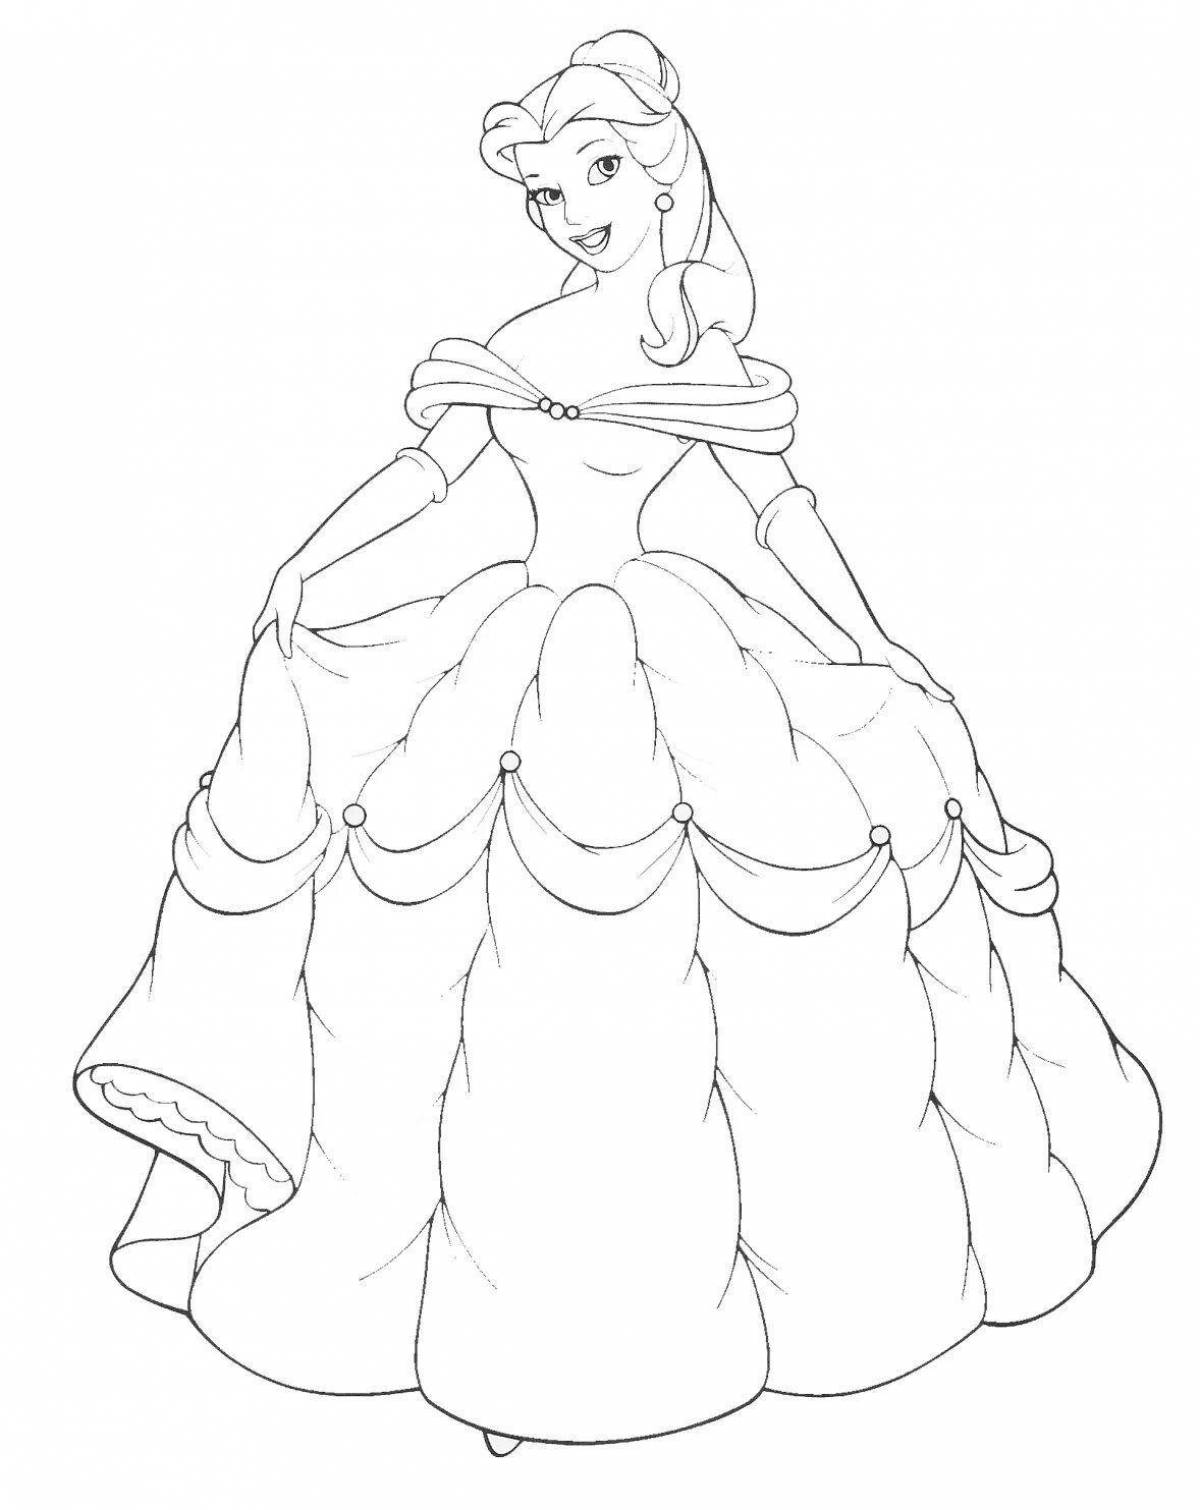 Mysterious underwear coloring page